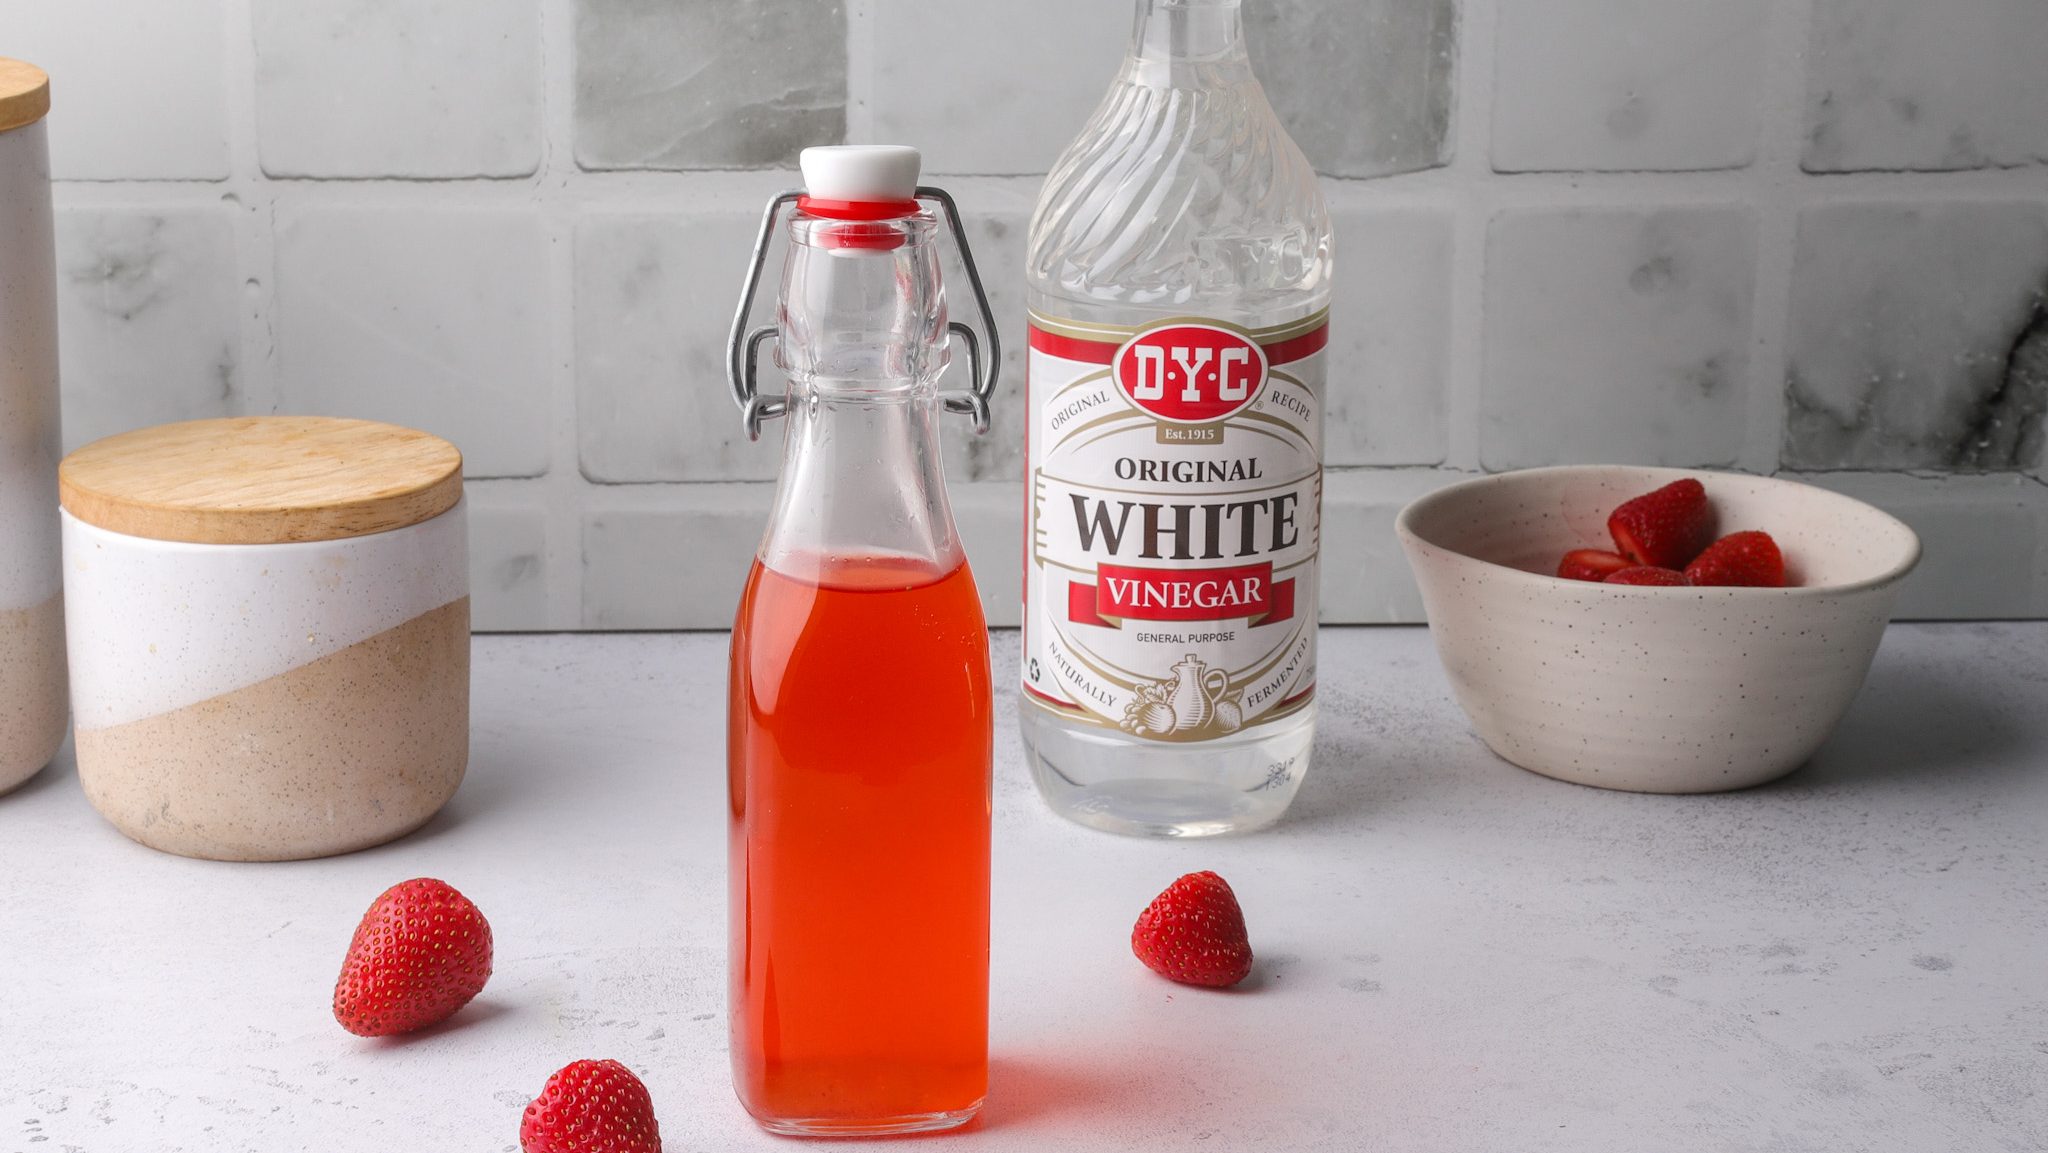 A bottle of red liquid and white vinegar surrounded by strawberries and a bowl of strawberries.